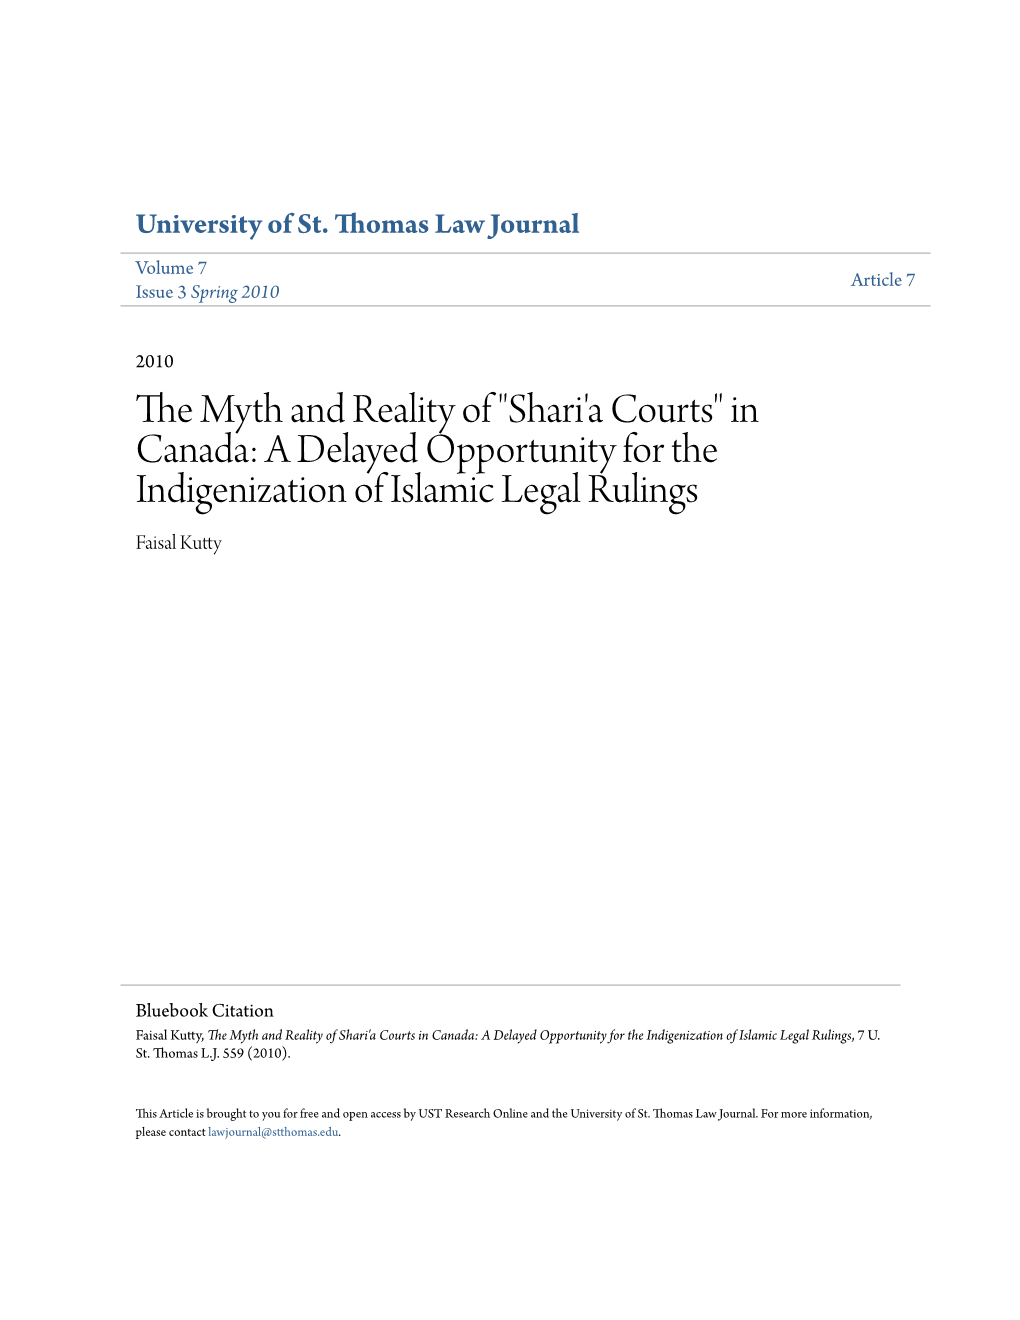 The Myth and Reality of "Shari'a Courts" in Canada: a Delayed